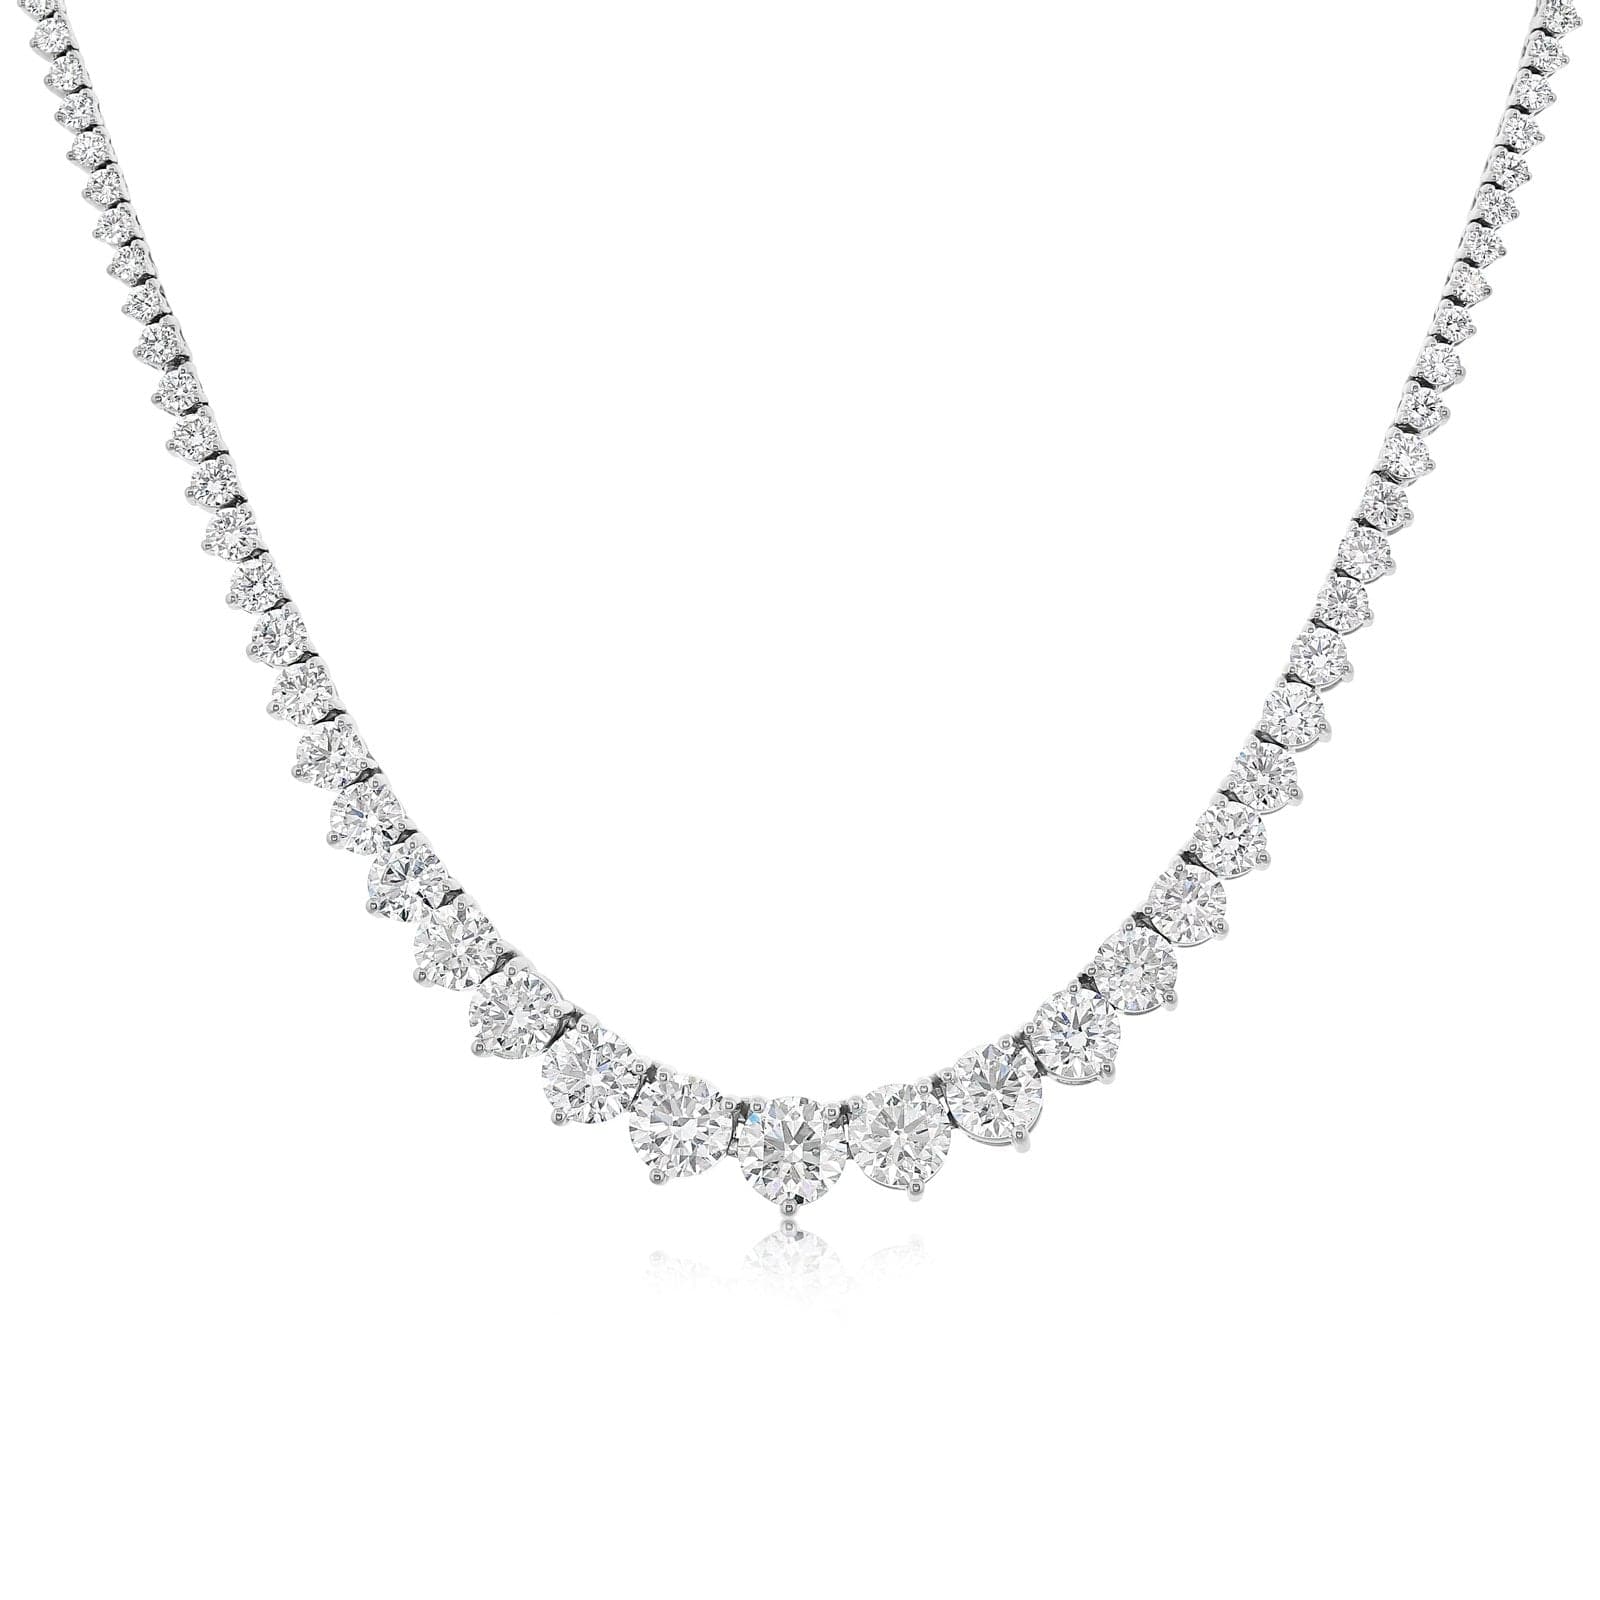 A 18K white gold, cultured pearl and diamond necklace … | Drouot.com